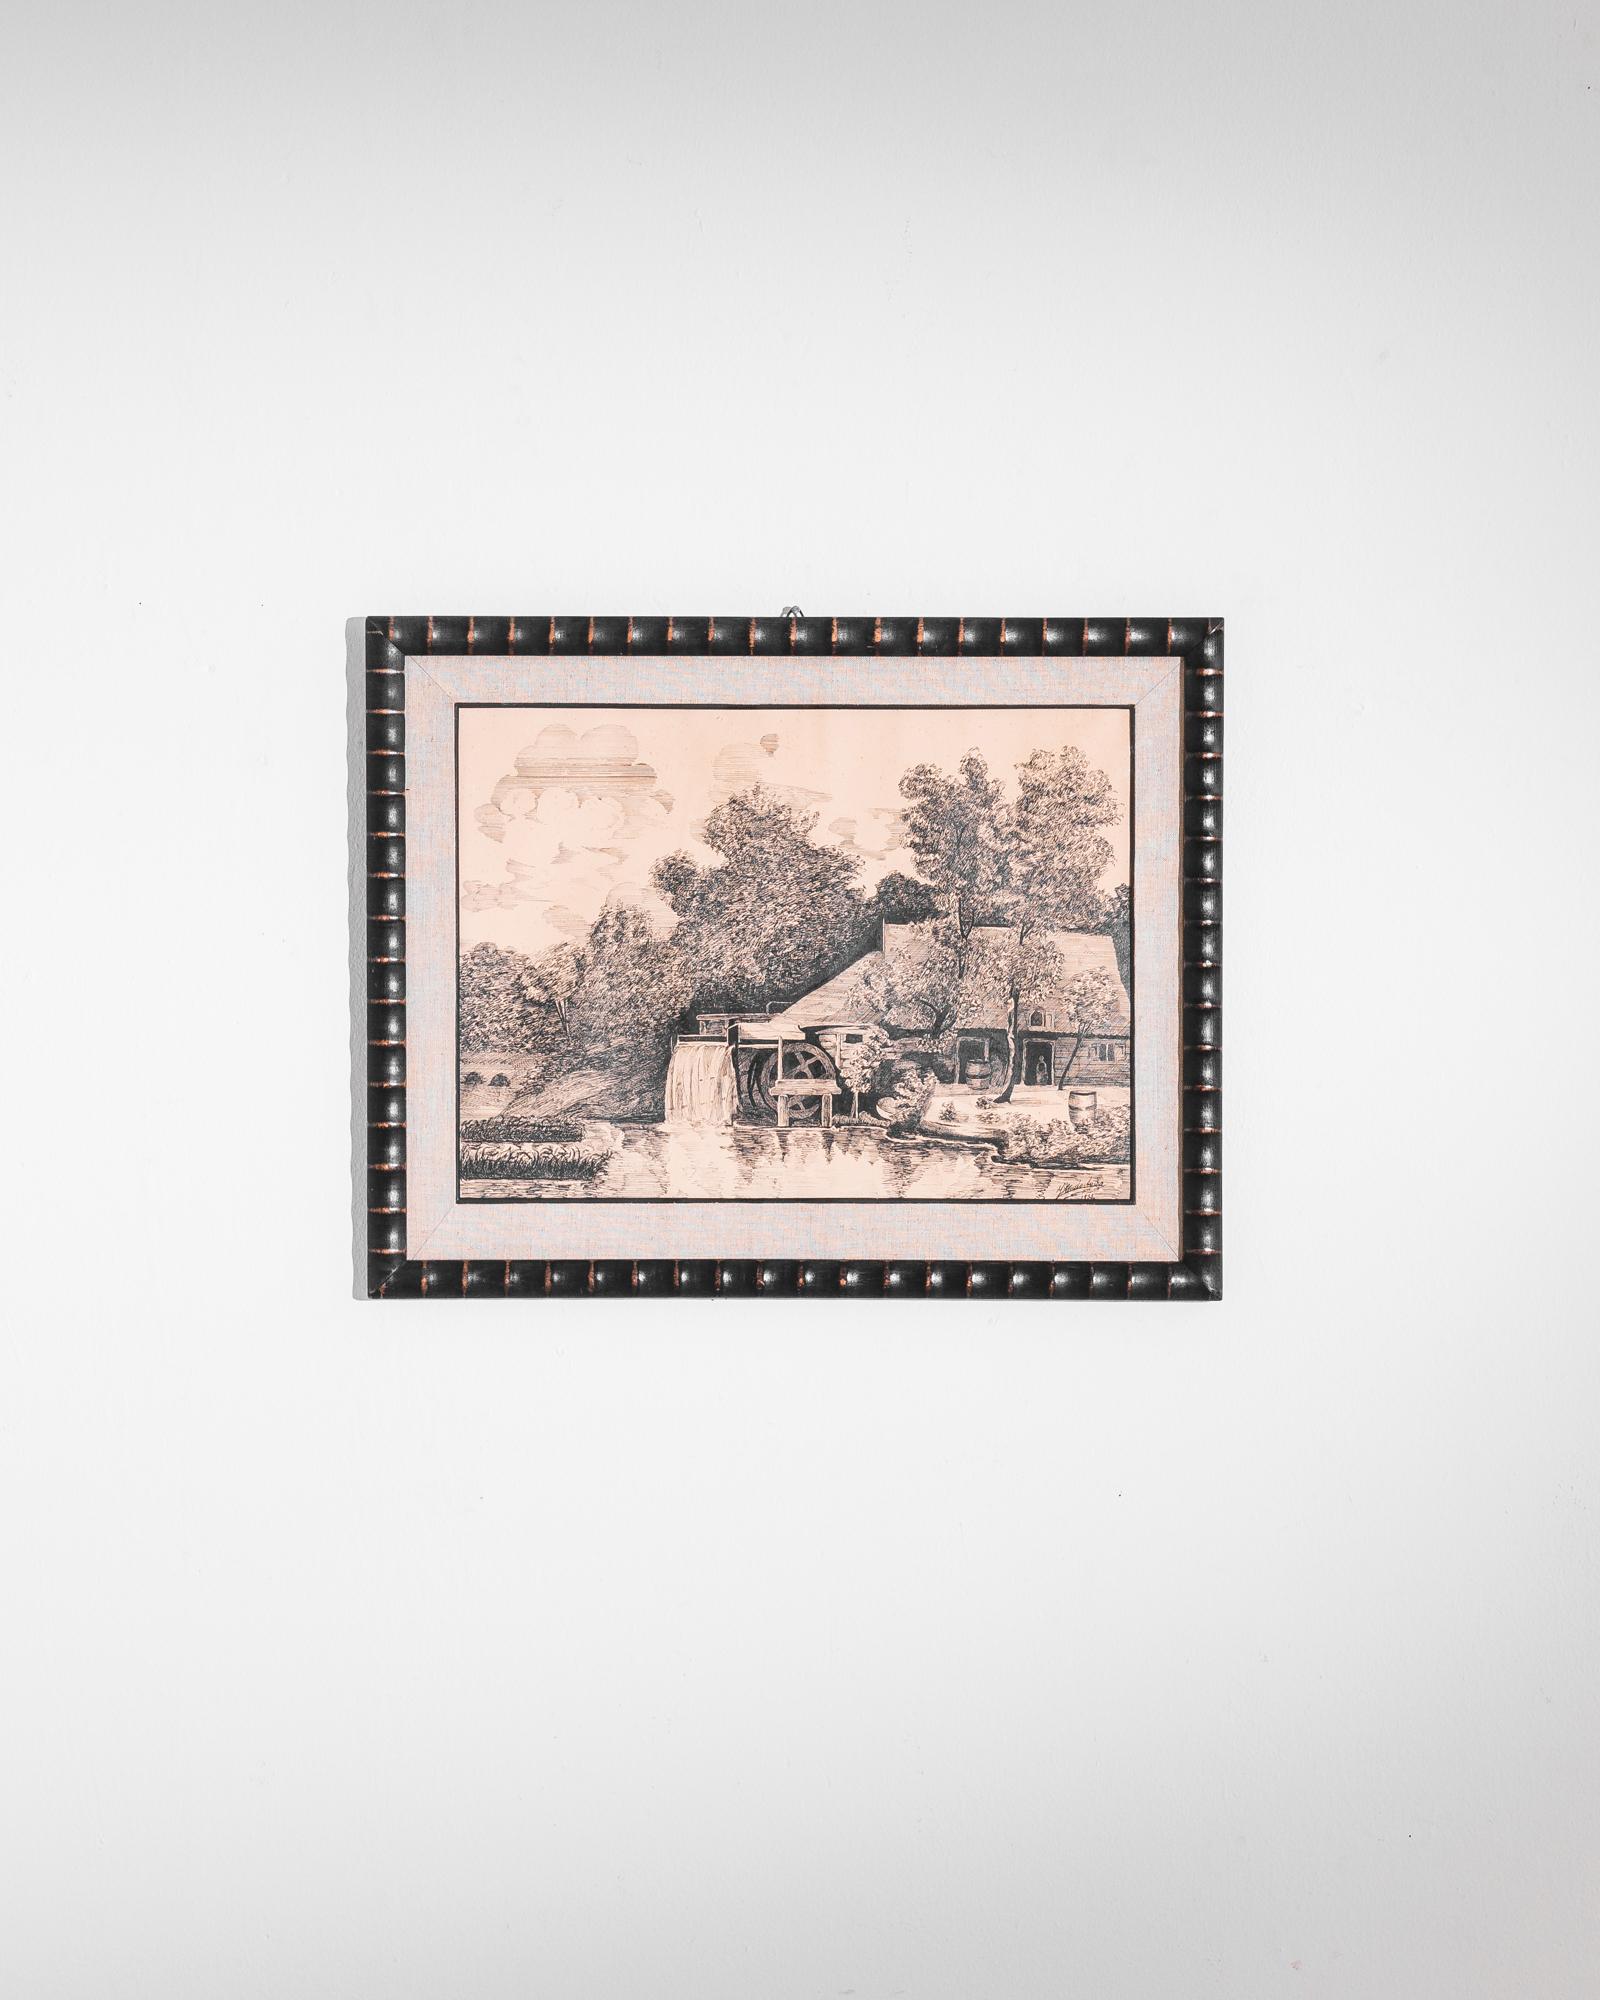 A pastoral etching from 1960s Belgium in a wooden frame. The image depicts a mill house by a stream. A wealth of closely observed detail — the wind in the trees, the reeds in the water, a pair of barrels and a small figure standing in the open